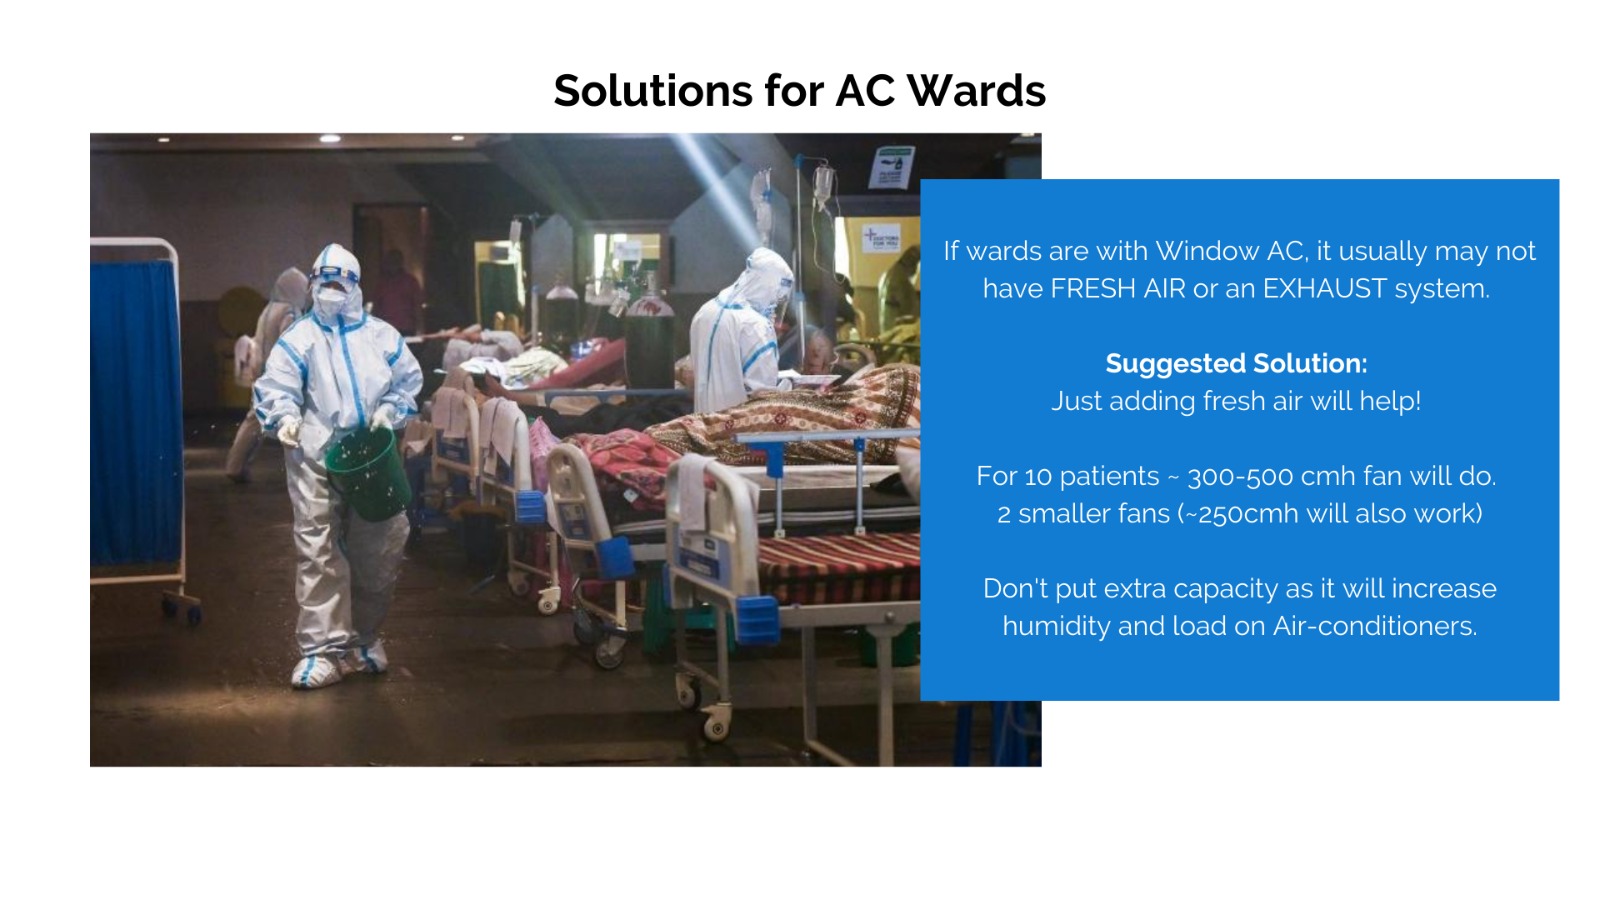 Solutions for AC Wards